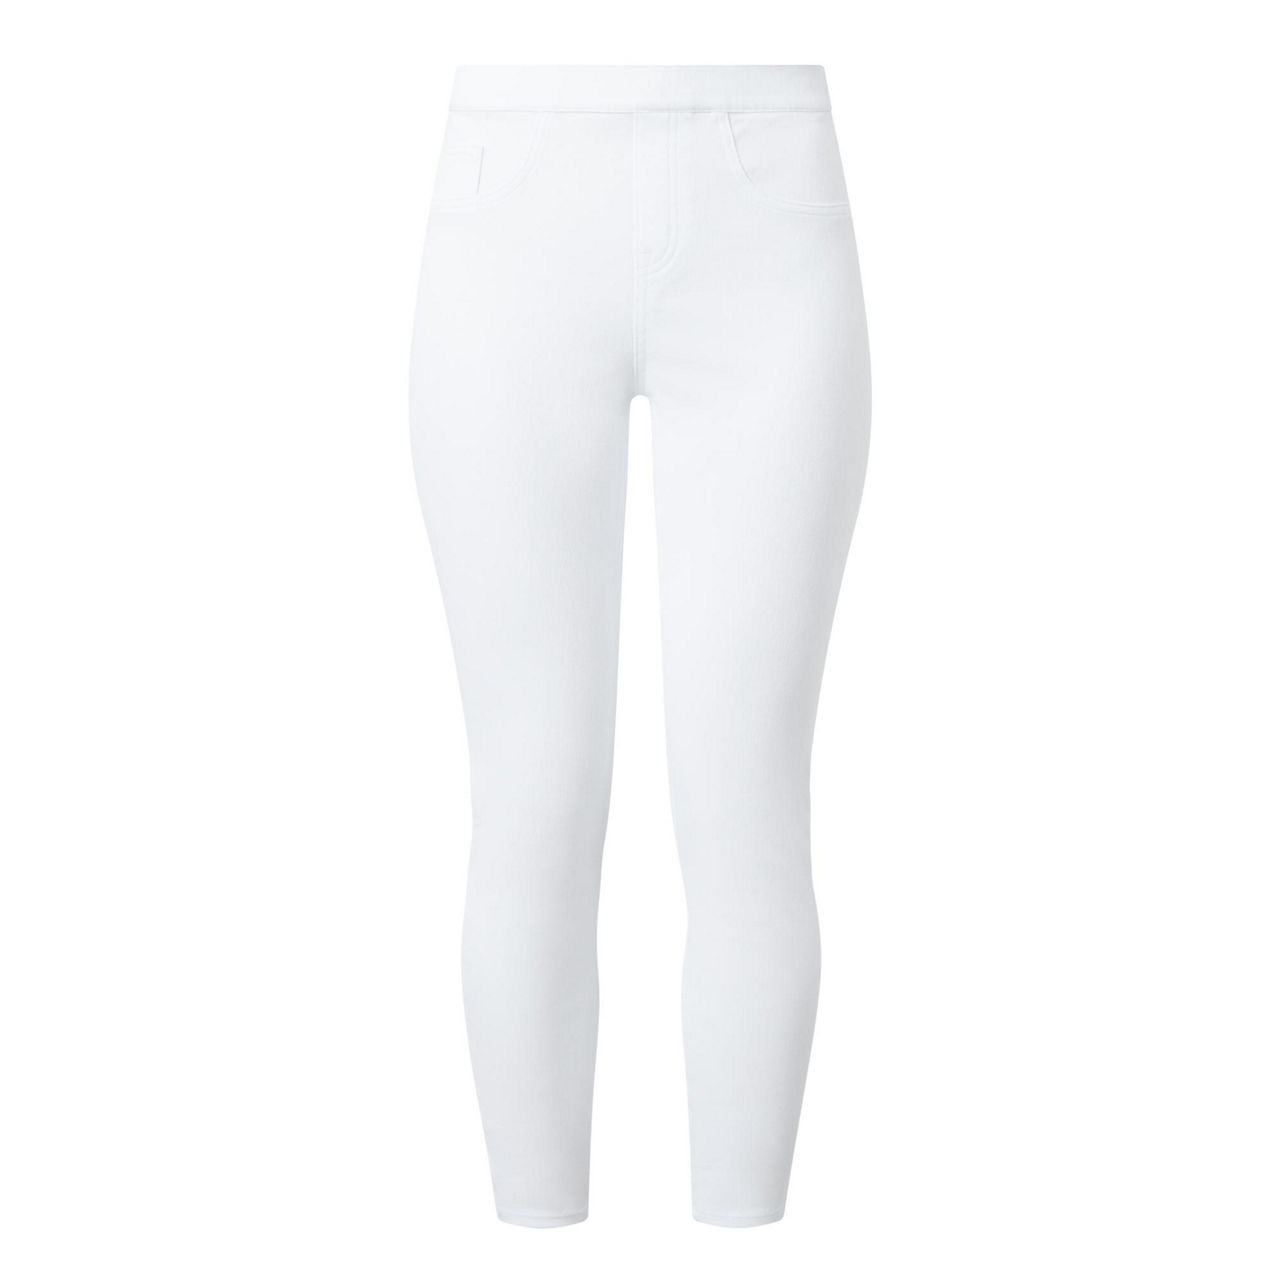 SPANX, Pants & Jumpsuits, Spanxjeanish Ankle Leggings White Jeans Jegging